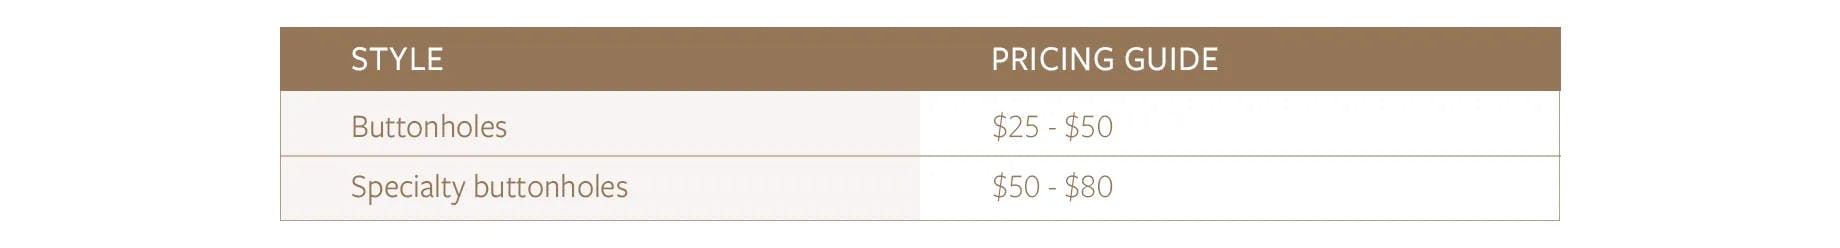 A pricing guide table with two columns: "Style" and "Pricing Guide." The rows list "Buttonholes" priced at $25 - $50 and "Specialty buttonholes" priced at $50 - $80. The table has a brown header background and a white body.